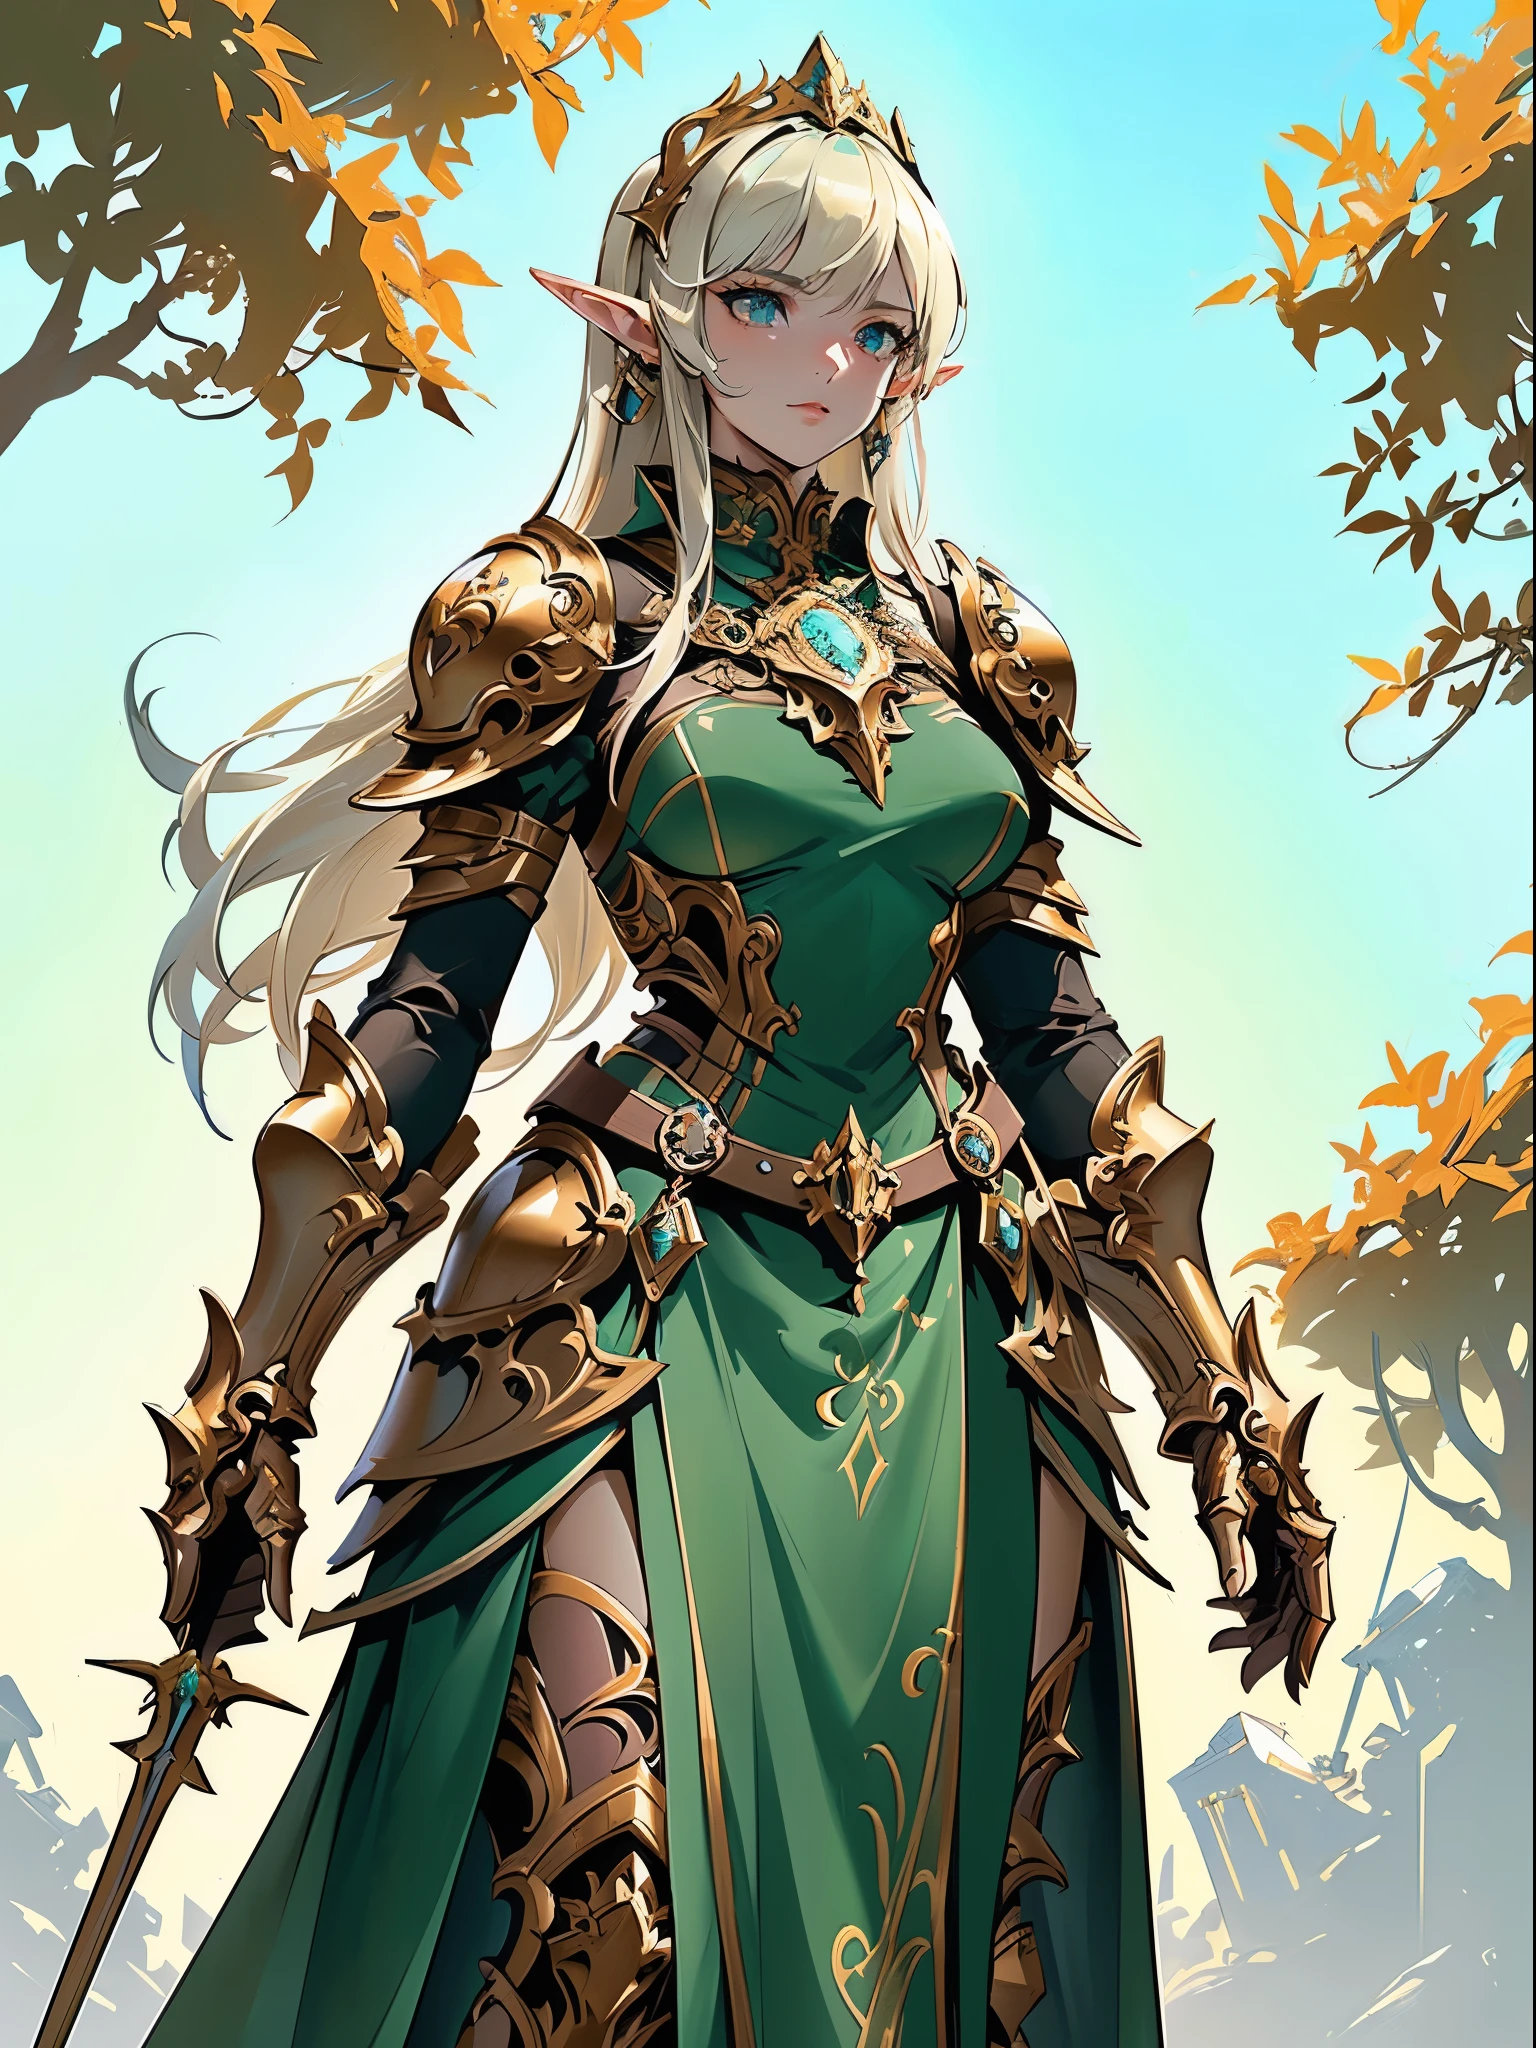 high details, best quality, 8k, [ultra detailed], masterpiece, best quality, (extremely detailed), full body, ultra wide shot, photorealistic, fantasy_world, fantasy art, dnd art, rpg art, realistic art, a wide angle, (((anatomically correct))) a wallpaler of an elf knight, elf warrior, princess knight, shinning knight, ready for battle with her mount (intense details, Masterpiece, best quality: 1.5), female elf (intense details, Masterpiece, best quality: 1.5), ultra detailed face, ultra feminine, fair skin, exquisite beauty, gold hair, long hair, wavy hair, small pointed ears, dynamic eyes color, wearing heavy mech armor, shinning metal, armed with elven sword fantasysword sword, standing near her mount, dynamic mount , green meadows, blue skies background and some clouds background depth of field (intricate details, Masterpiece, best quality: 1.5), full body (intricate details, Masterpiece, best quality: 1.5), high details, best quality, highres, ultra wide angle